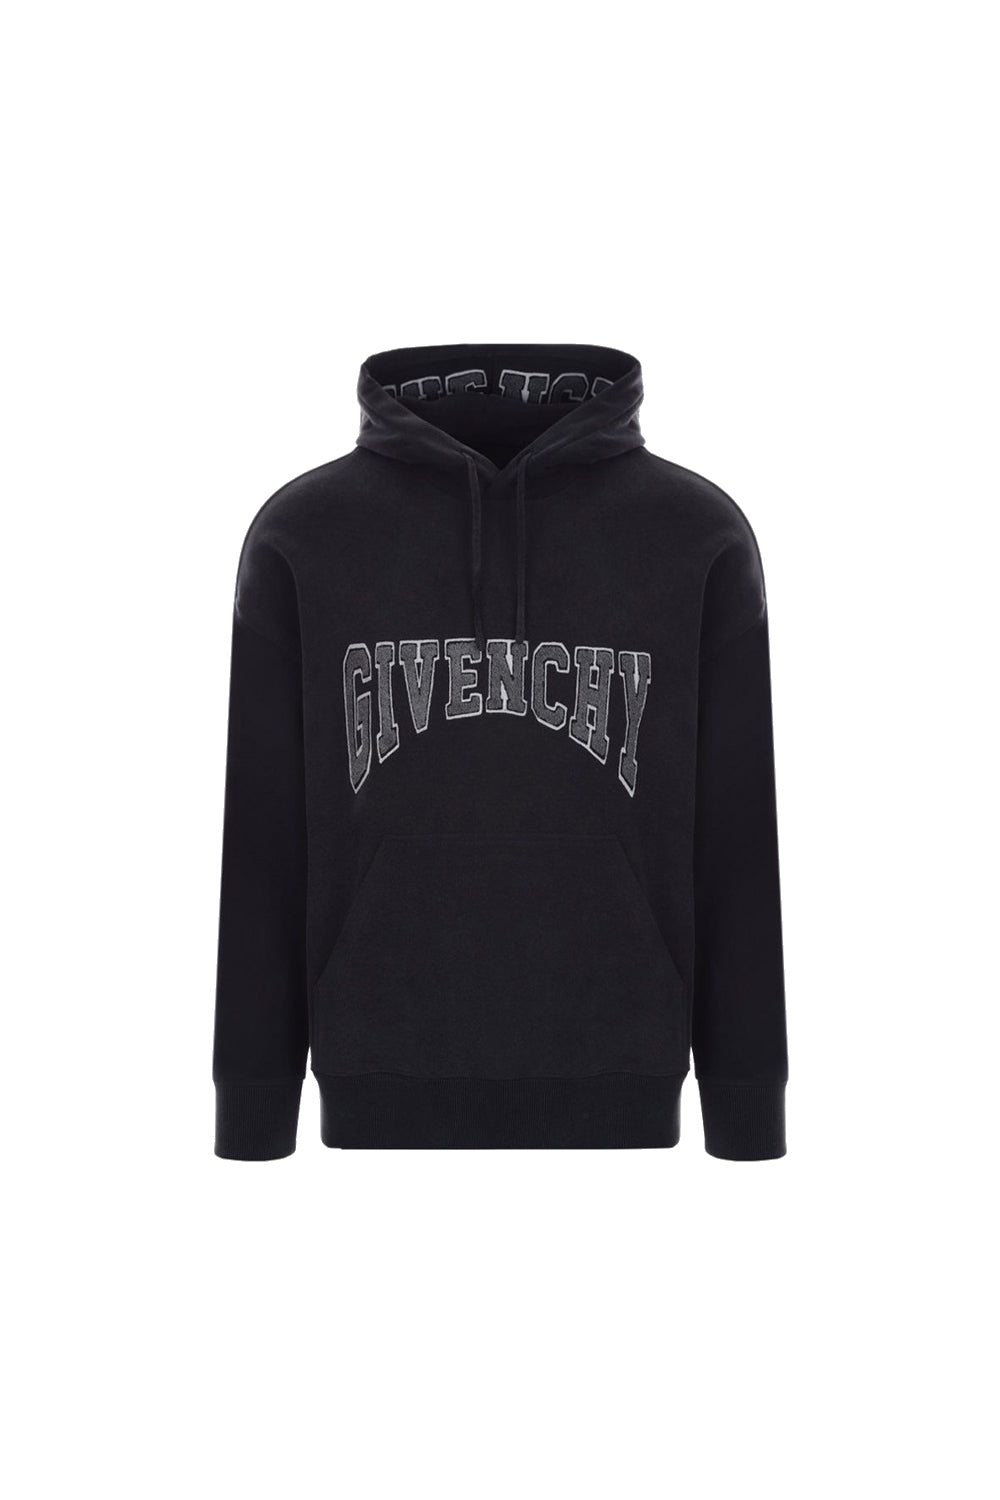 Givenchy logo hoodie